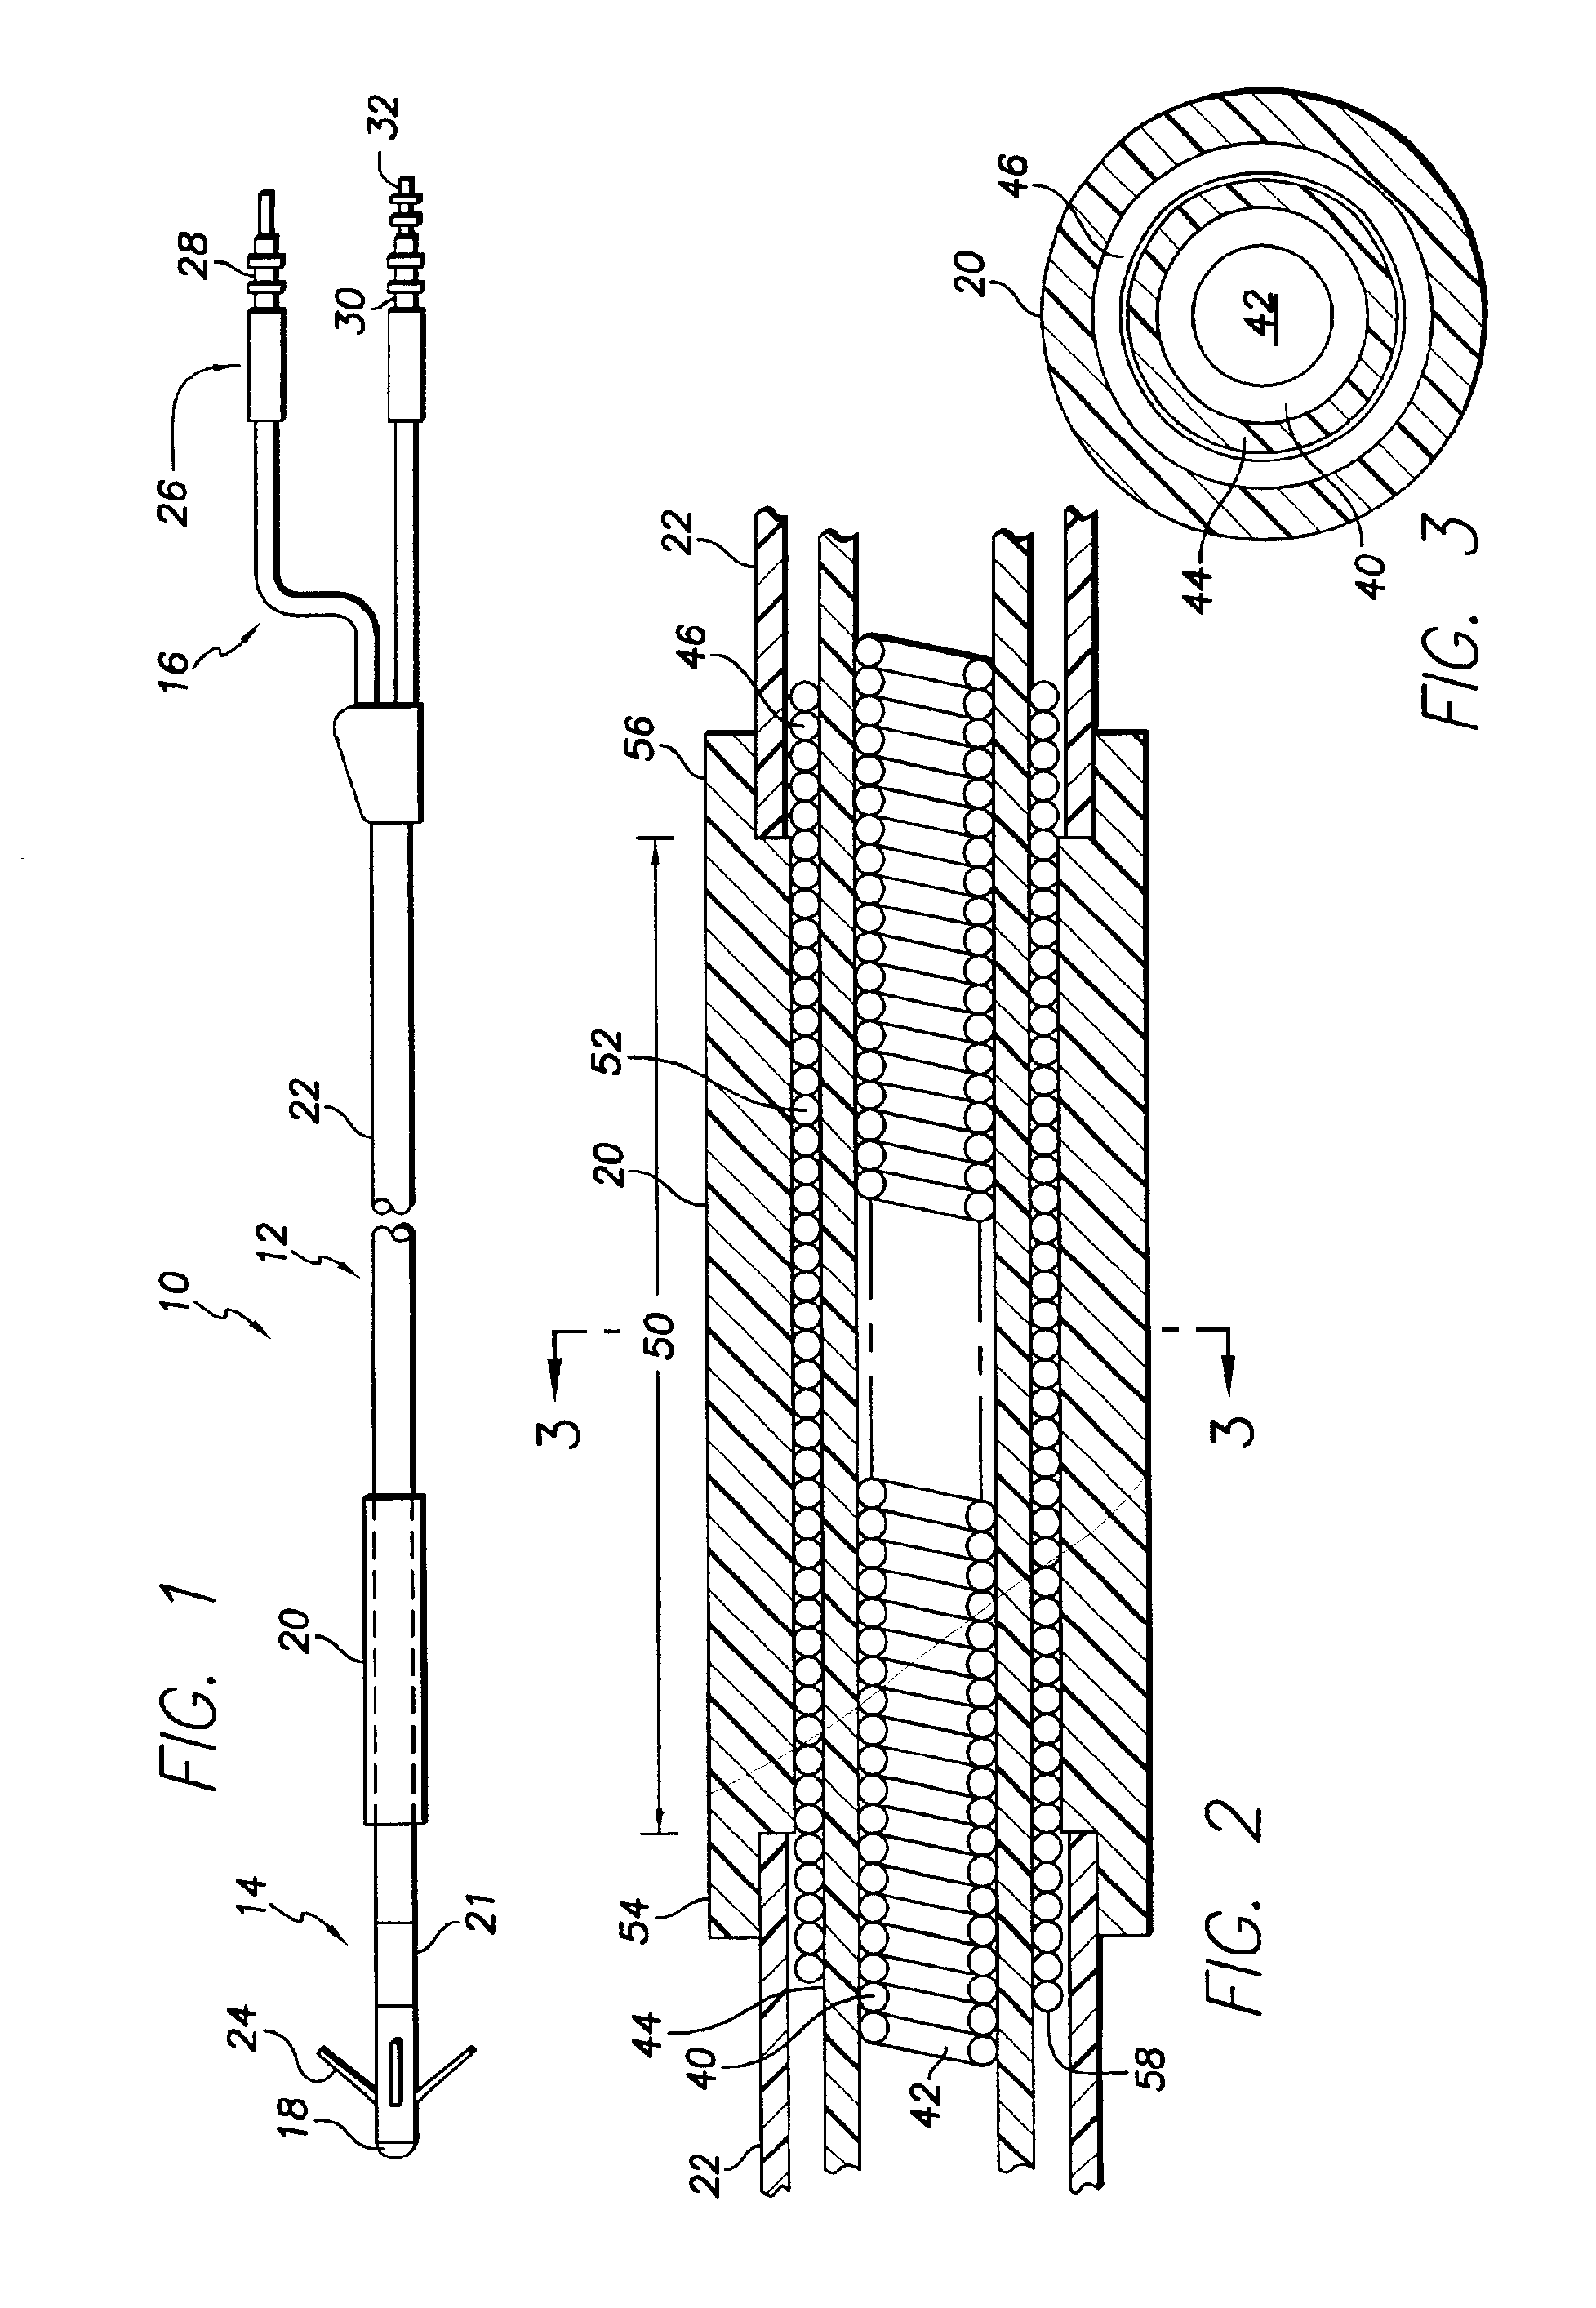 Body implantable lead including one or more conductive polymer electrodes and methods for fabricating same